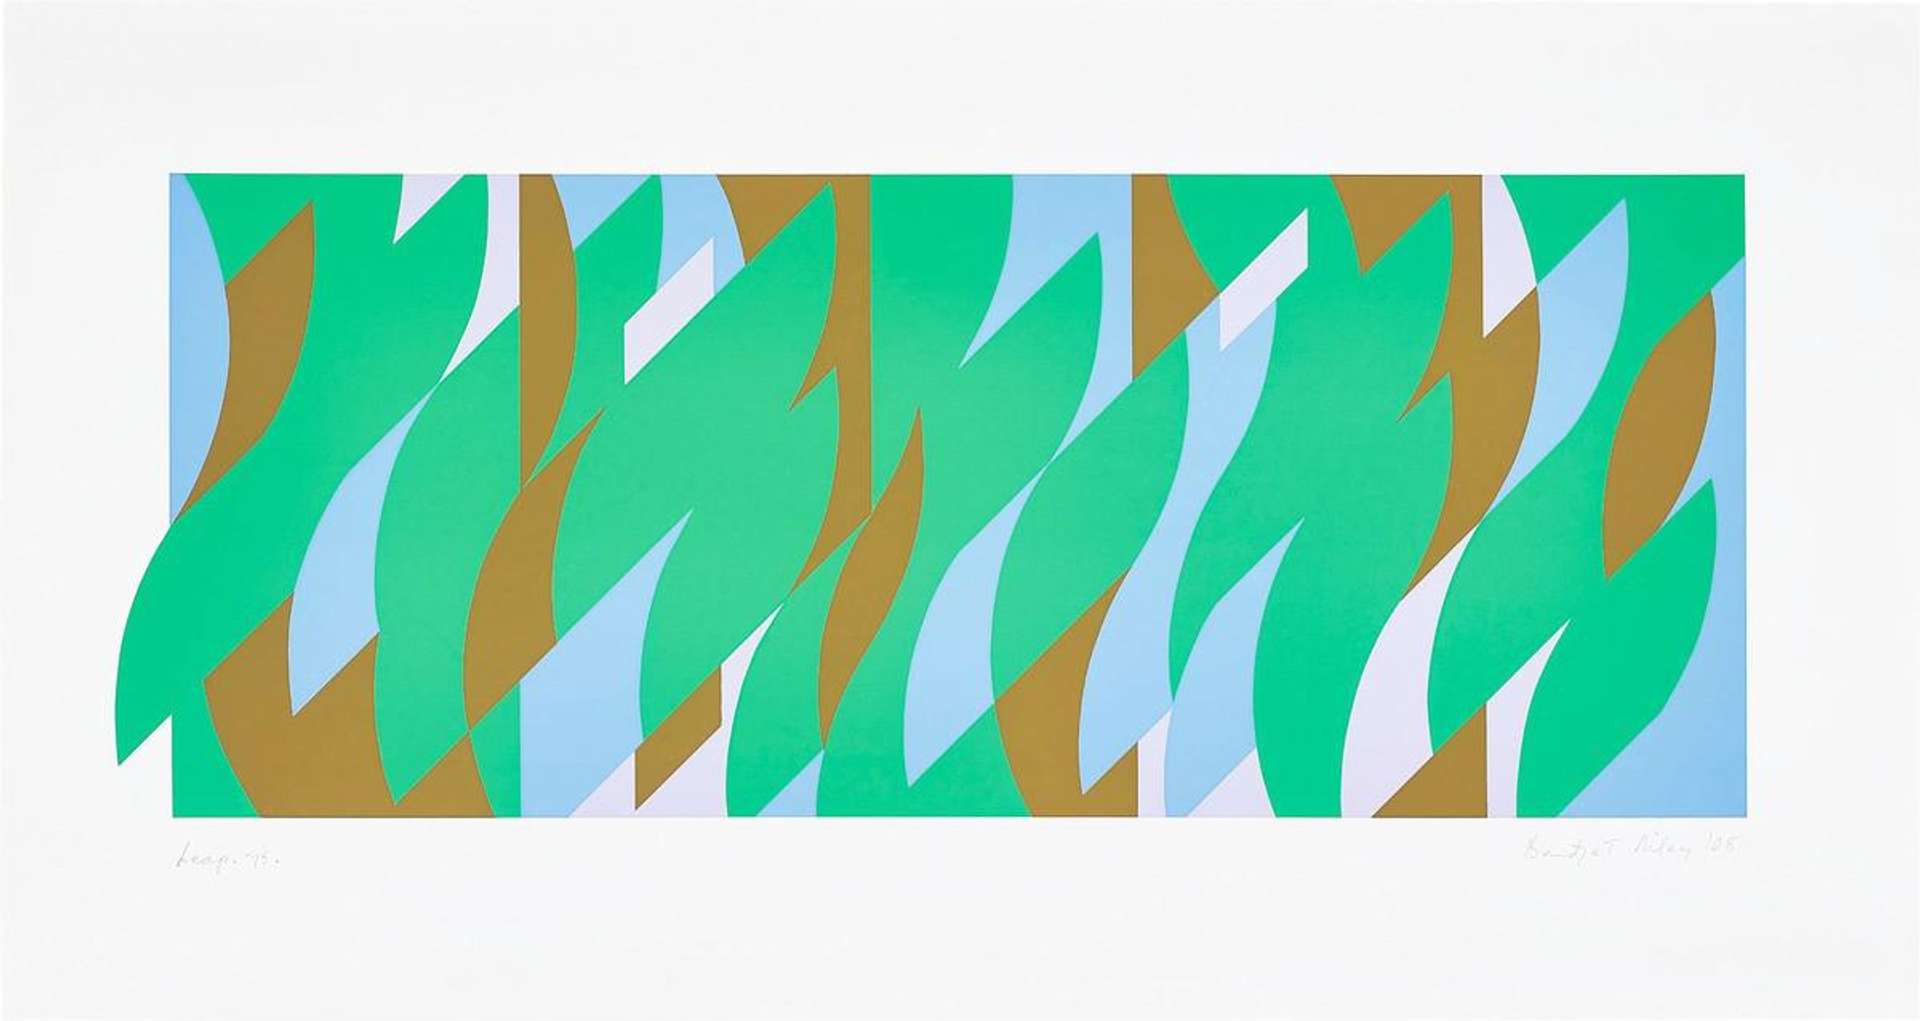 A series of lozenges in varying shades of green and brown overlap in this work.